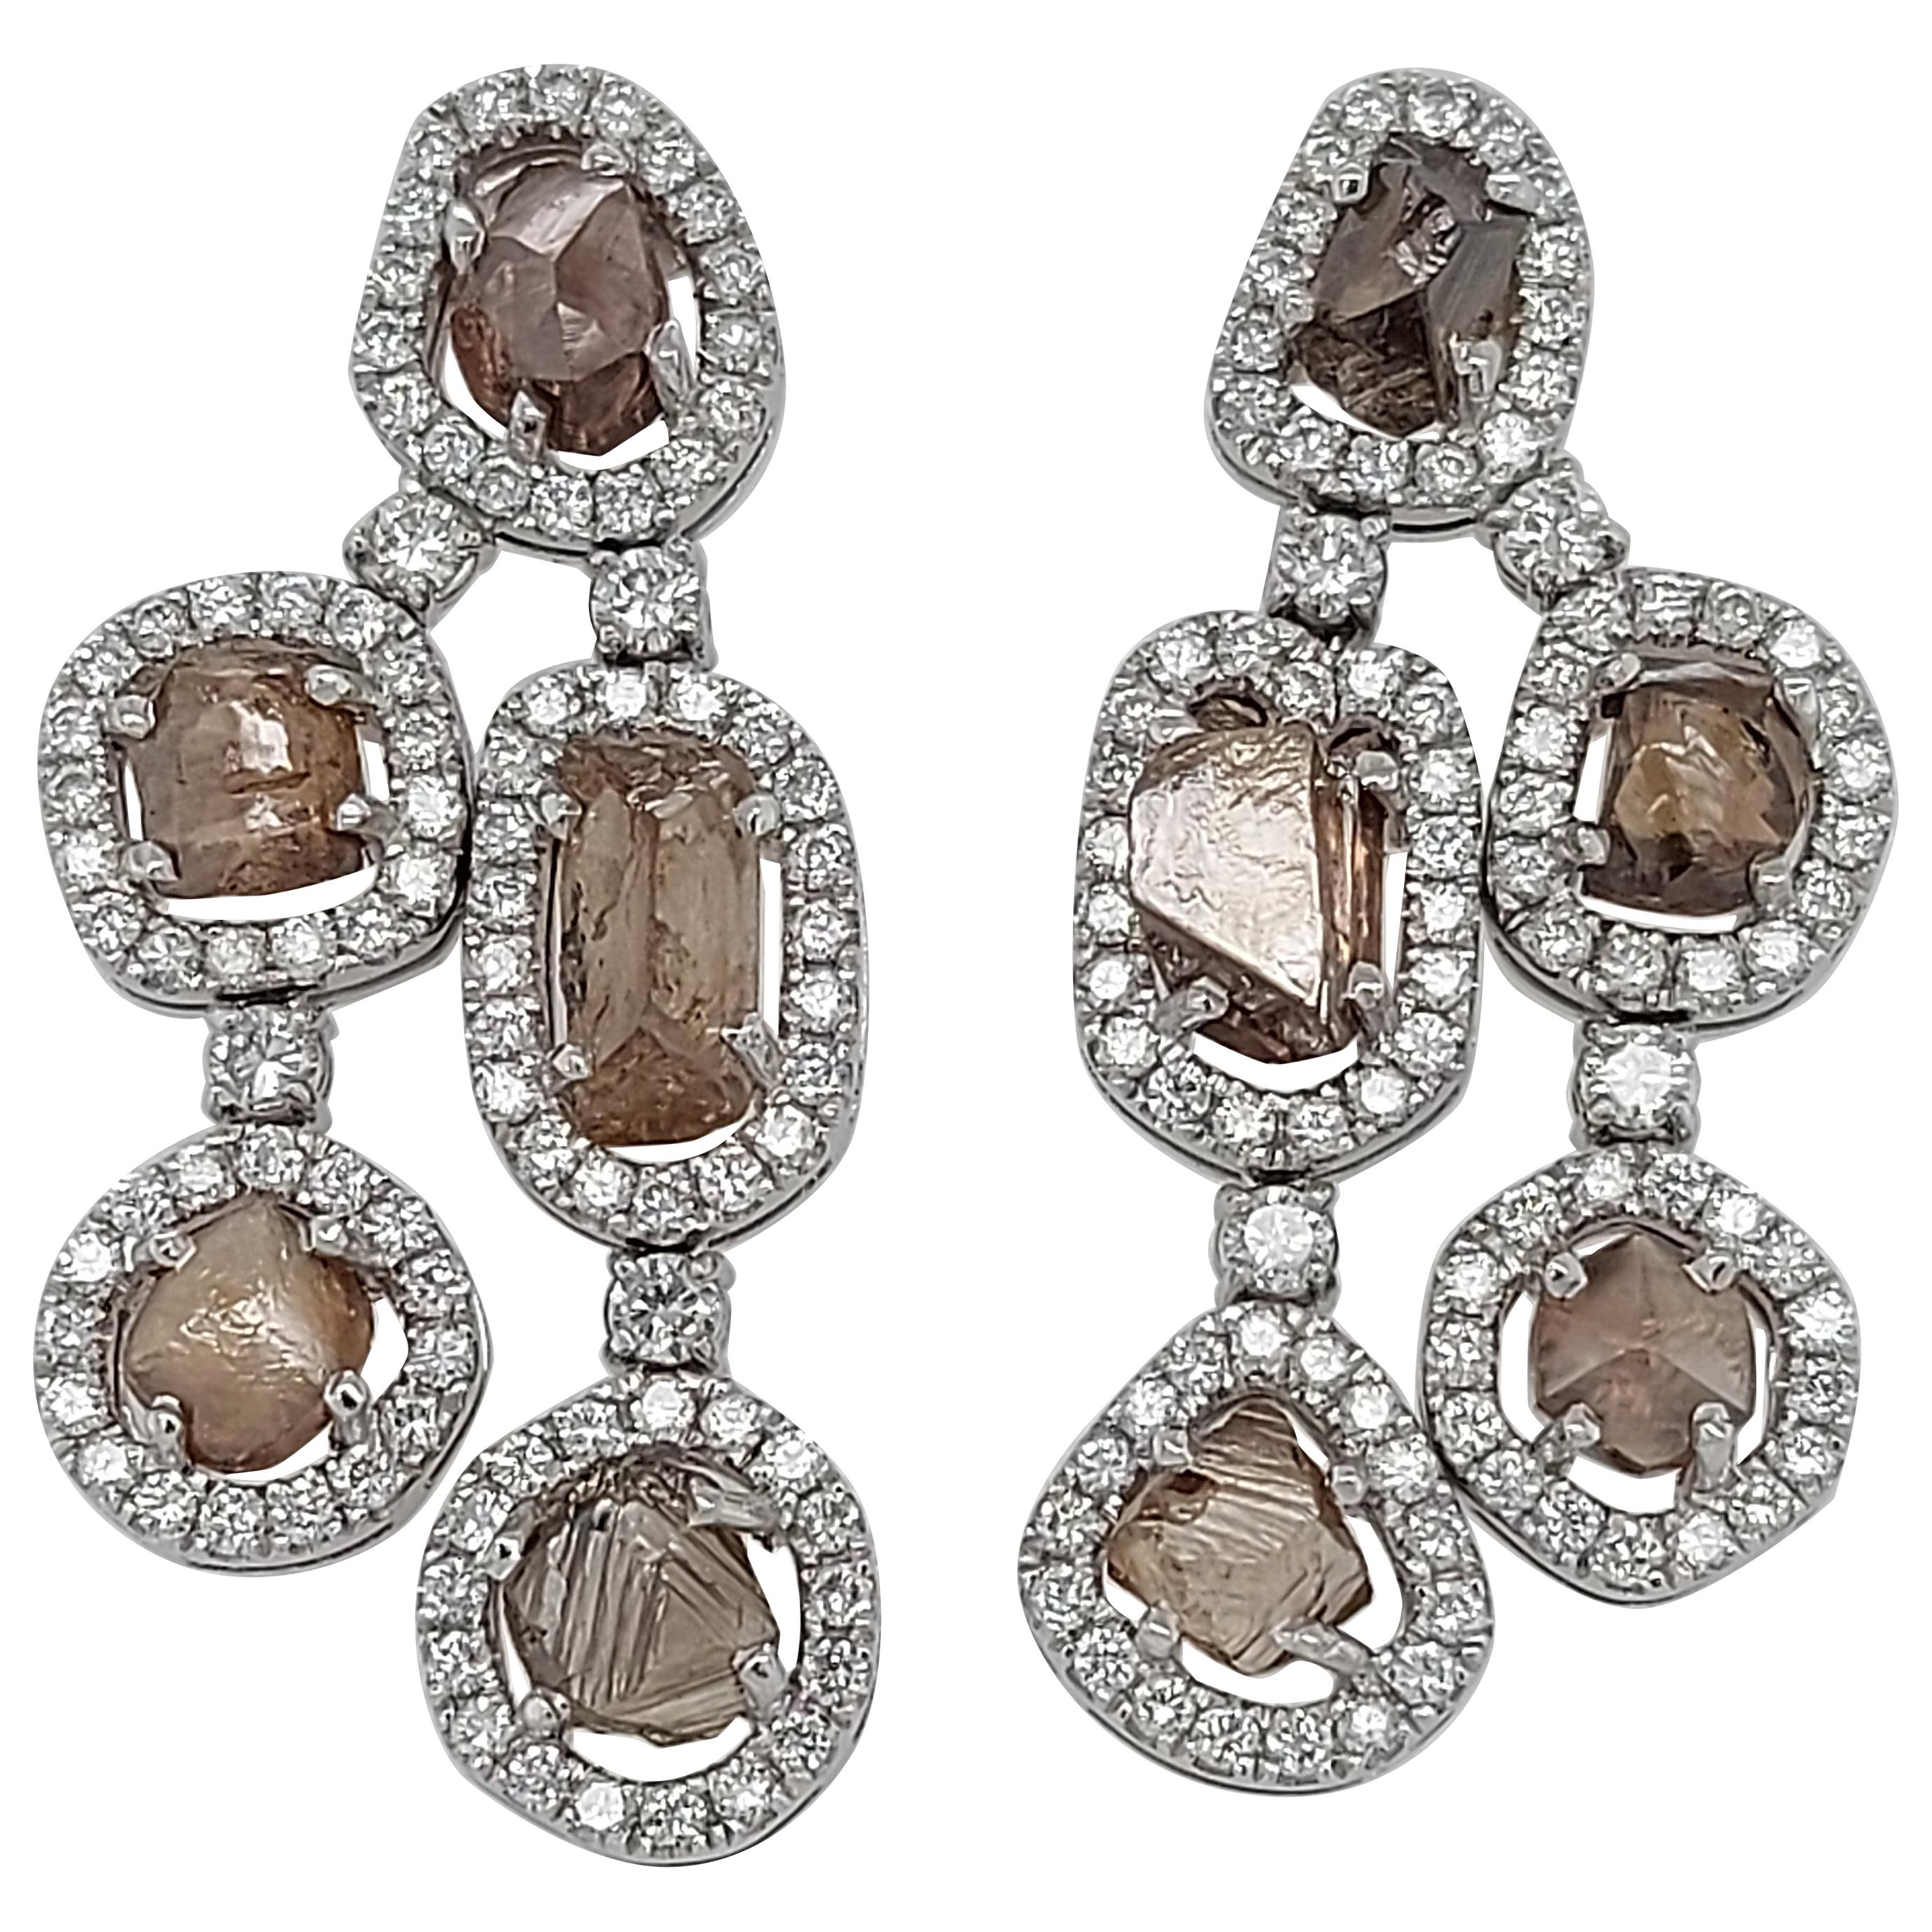 Magnificent 18kt Gold Chandelier Earrings with 13.22 Ct Natural Rough Diamonds